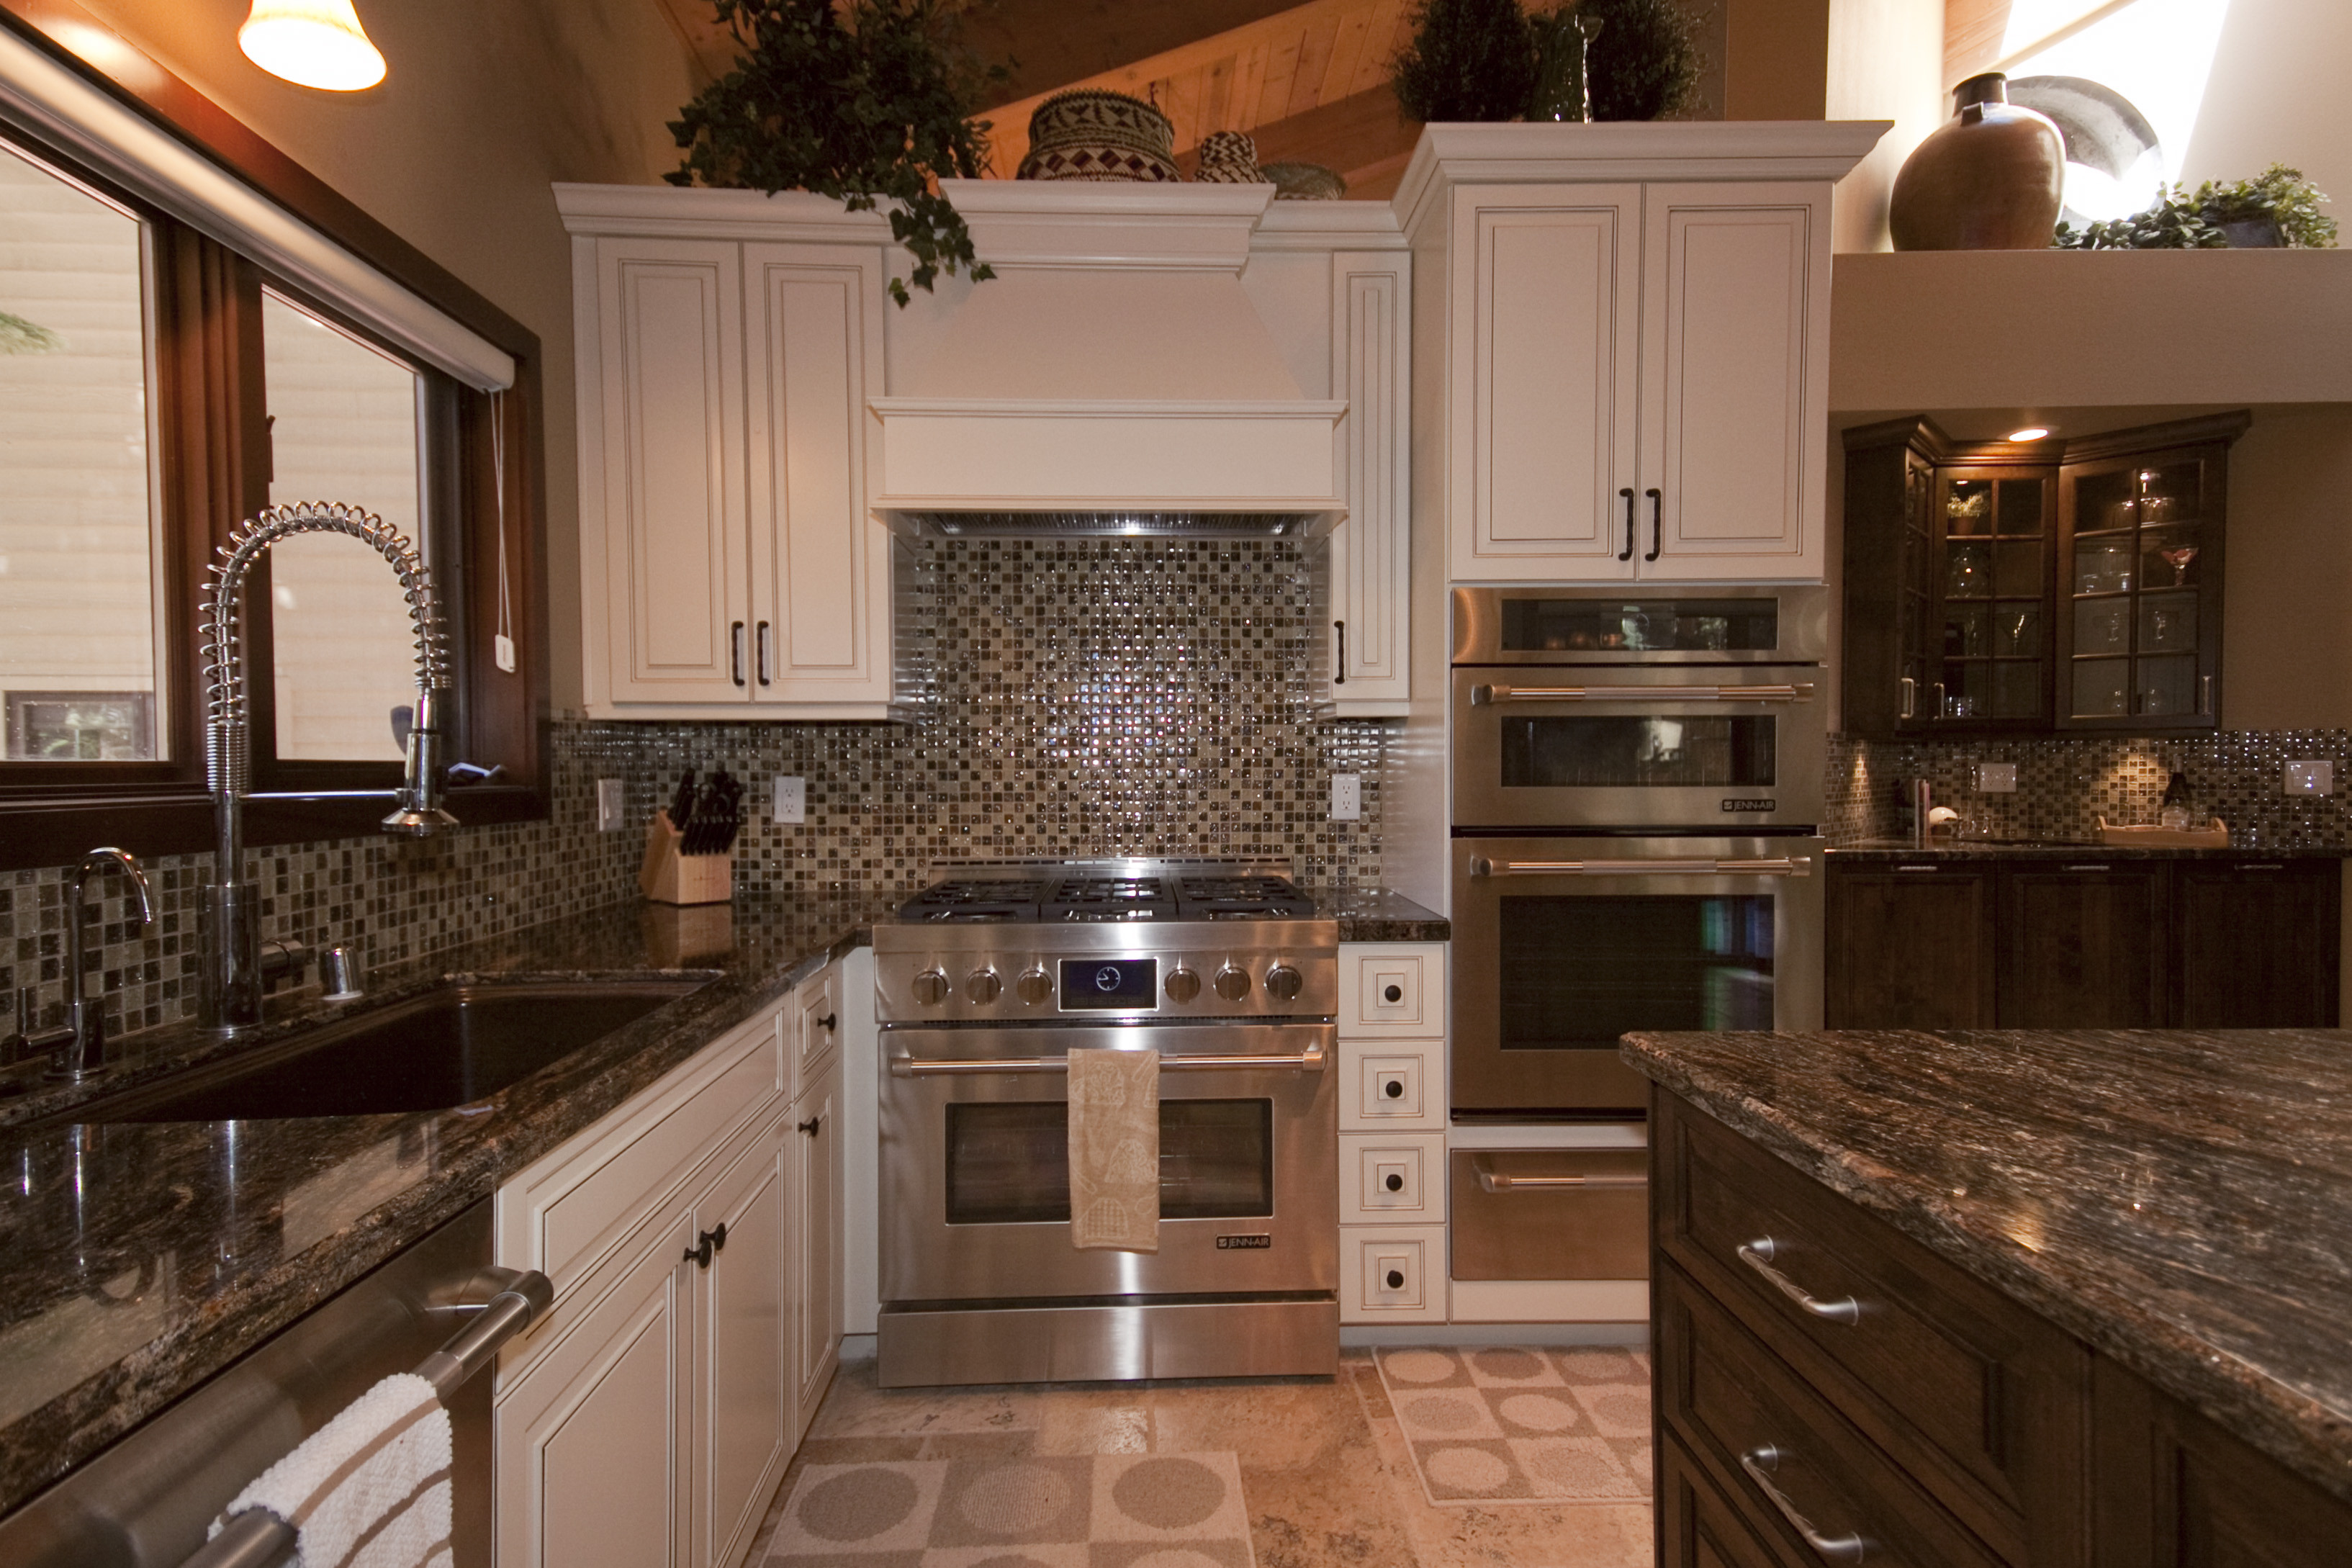 Kitchen Remodels Ideas Pictures
 Kitchen Remodeled Kitchens For Your Next